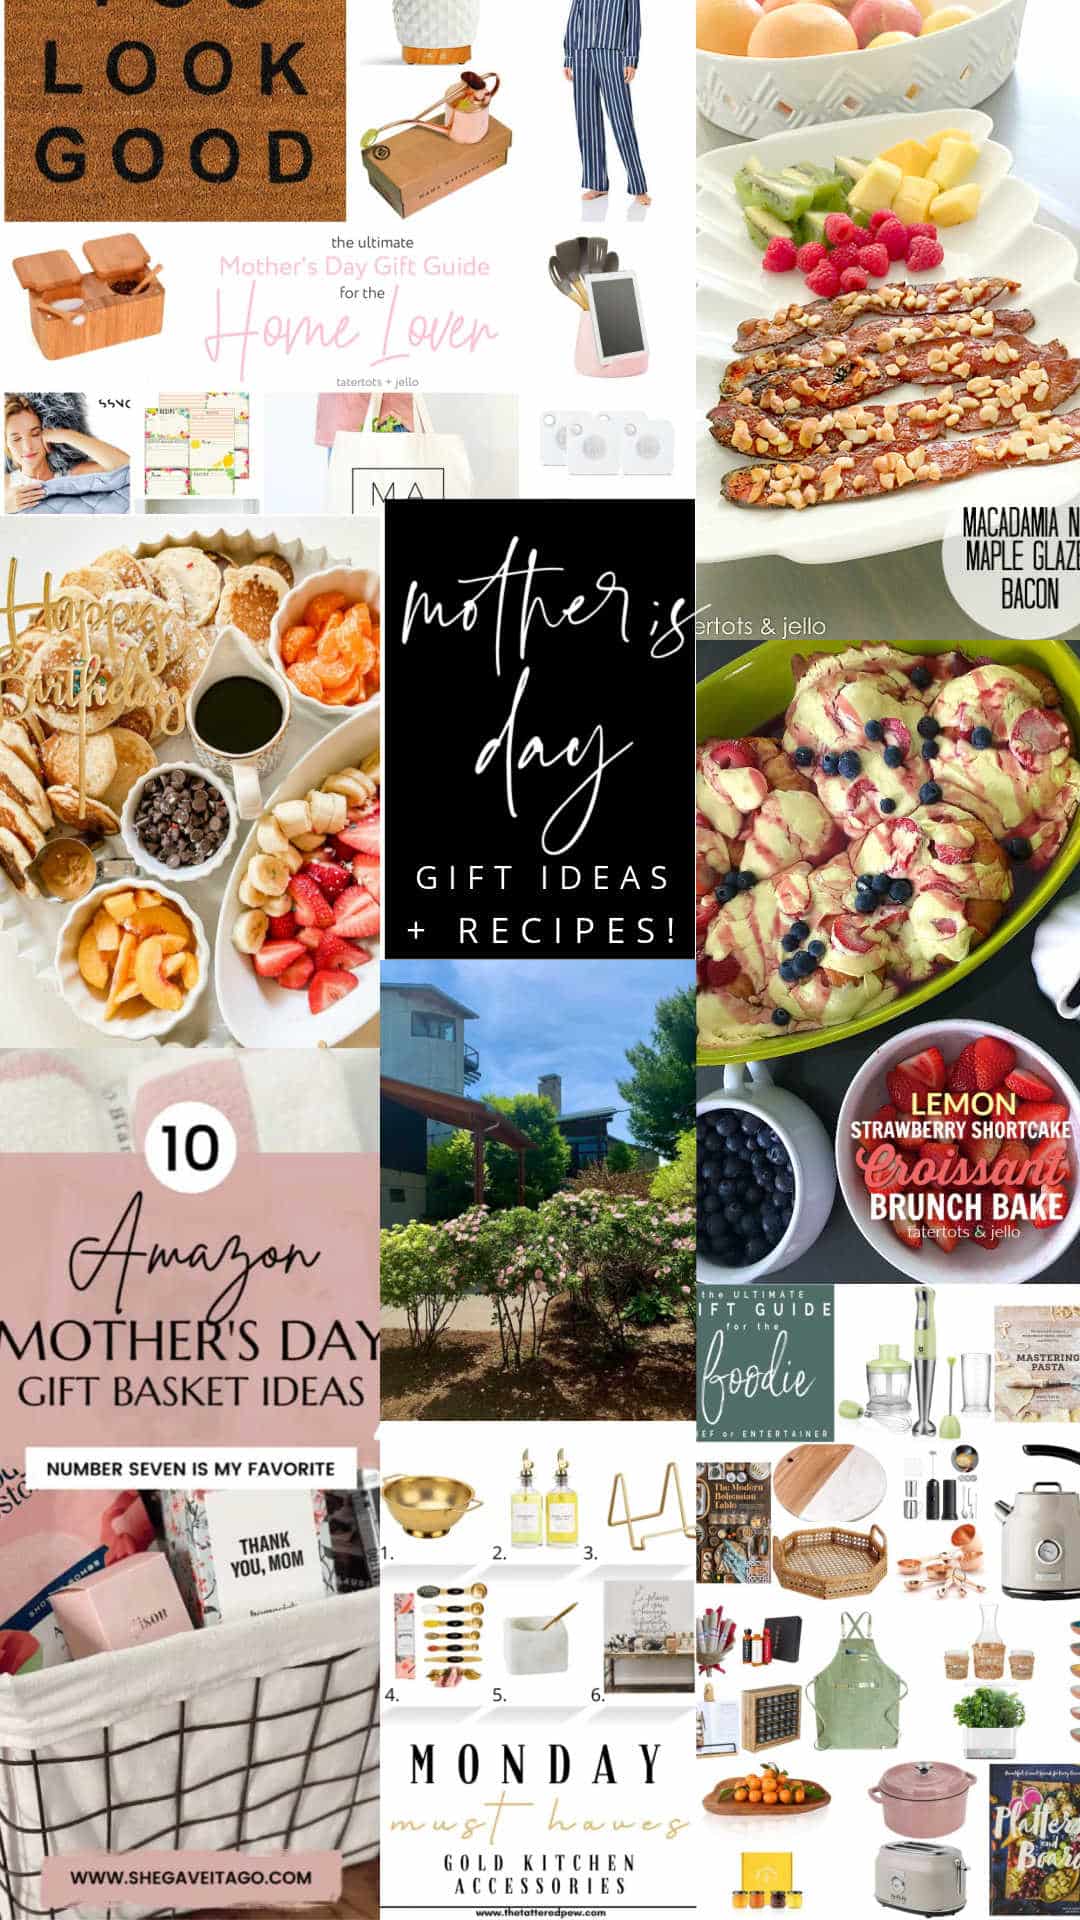 Mother's Day Recipes and Gift Ideas! Get ready for Mother's Day and Spring Parties with these amazing gift ideas, recipes and entertaining ideas!